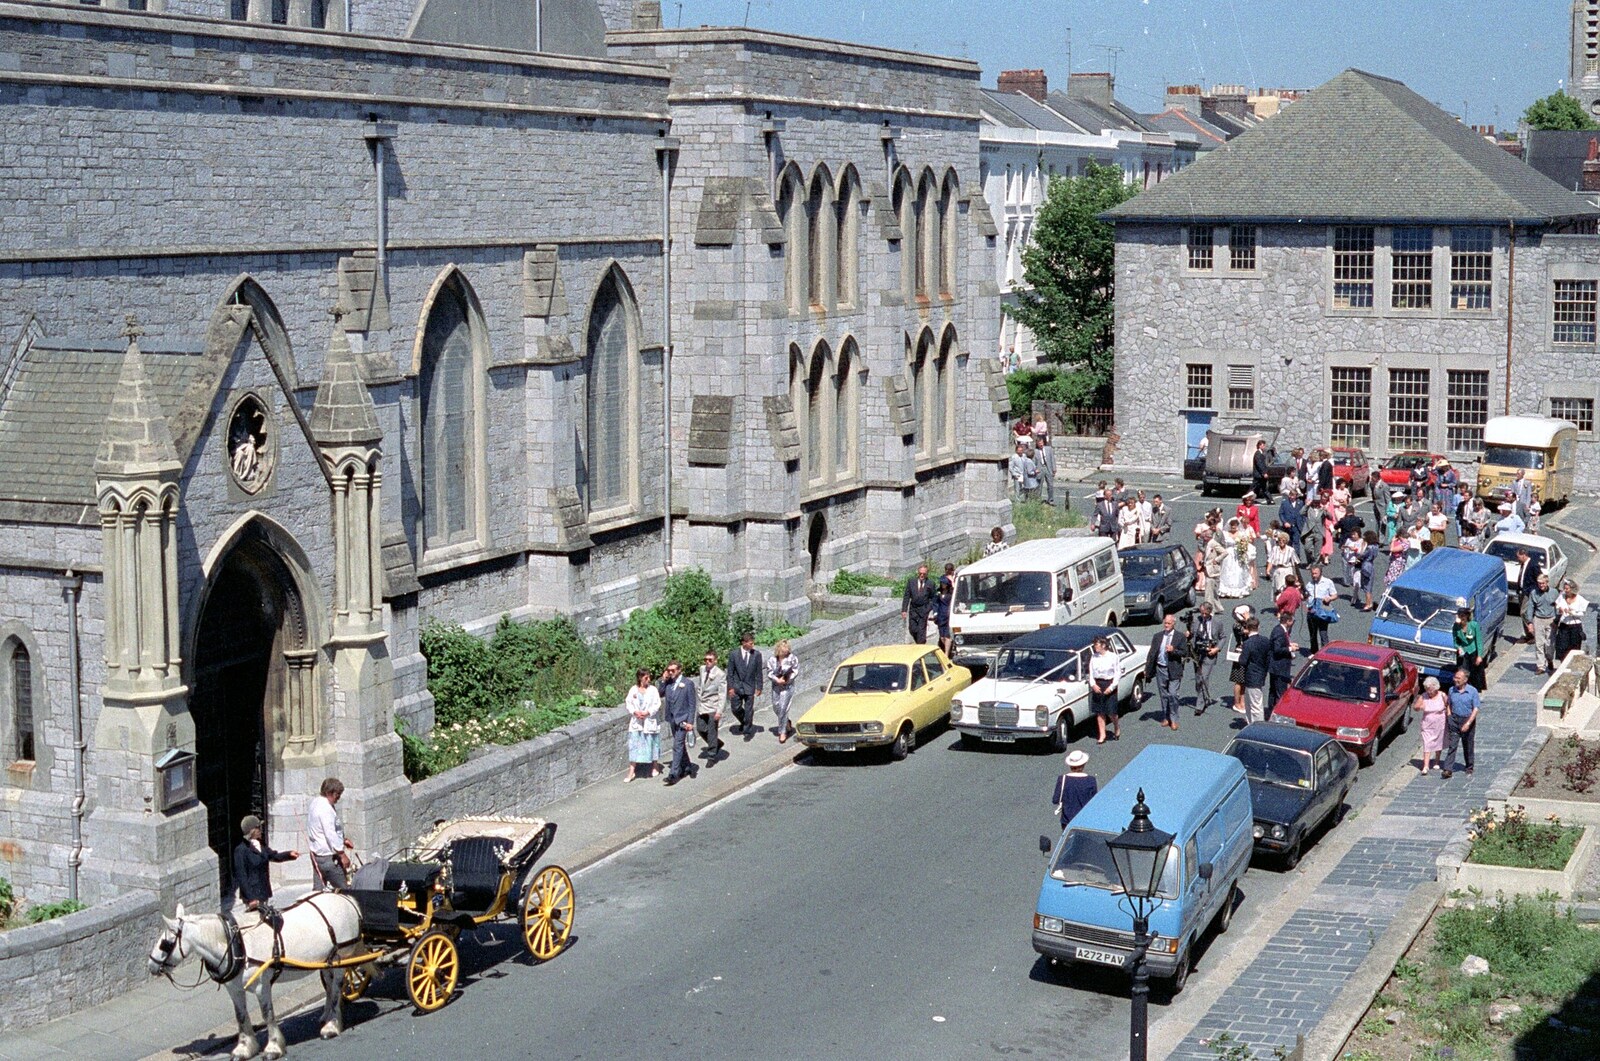 Wedding crowds in the street from Uni: Risky Business, A Wedding Occurs and Dave Leaves, Wyndham Square, Plymouth - 15th July 1989